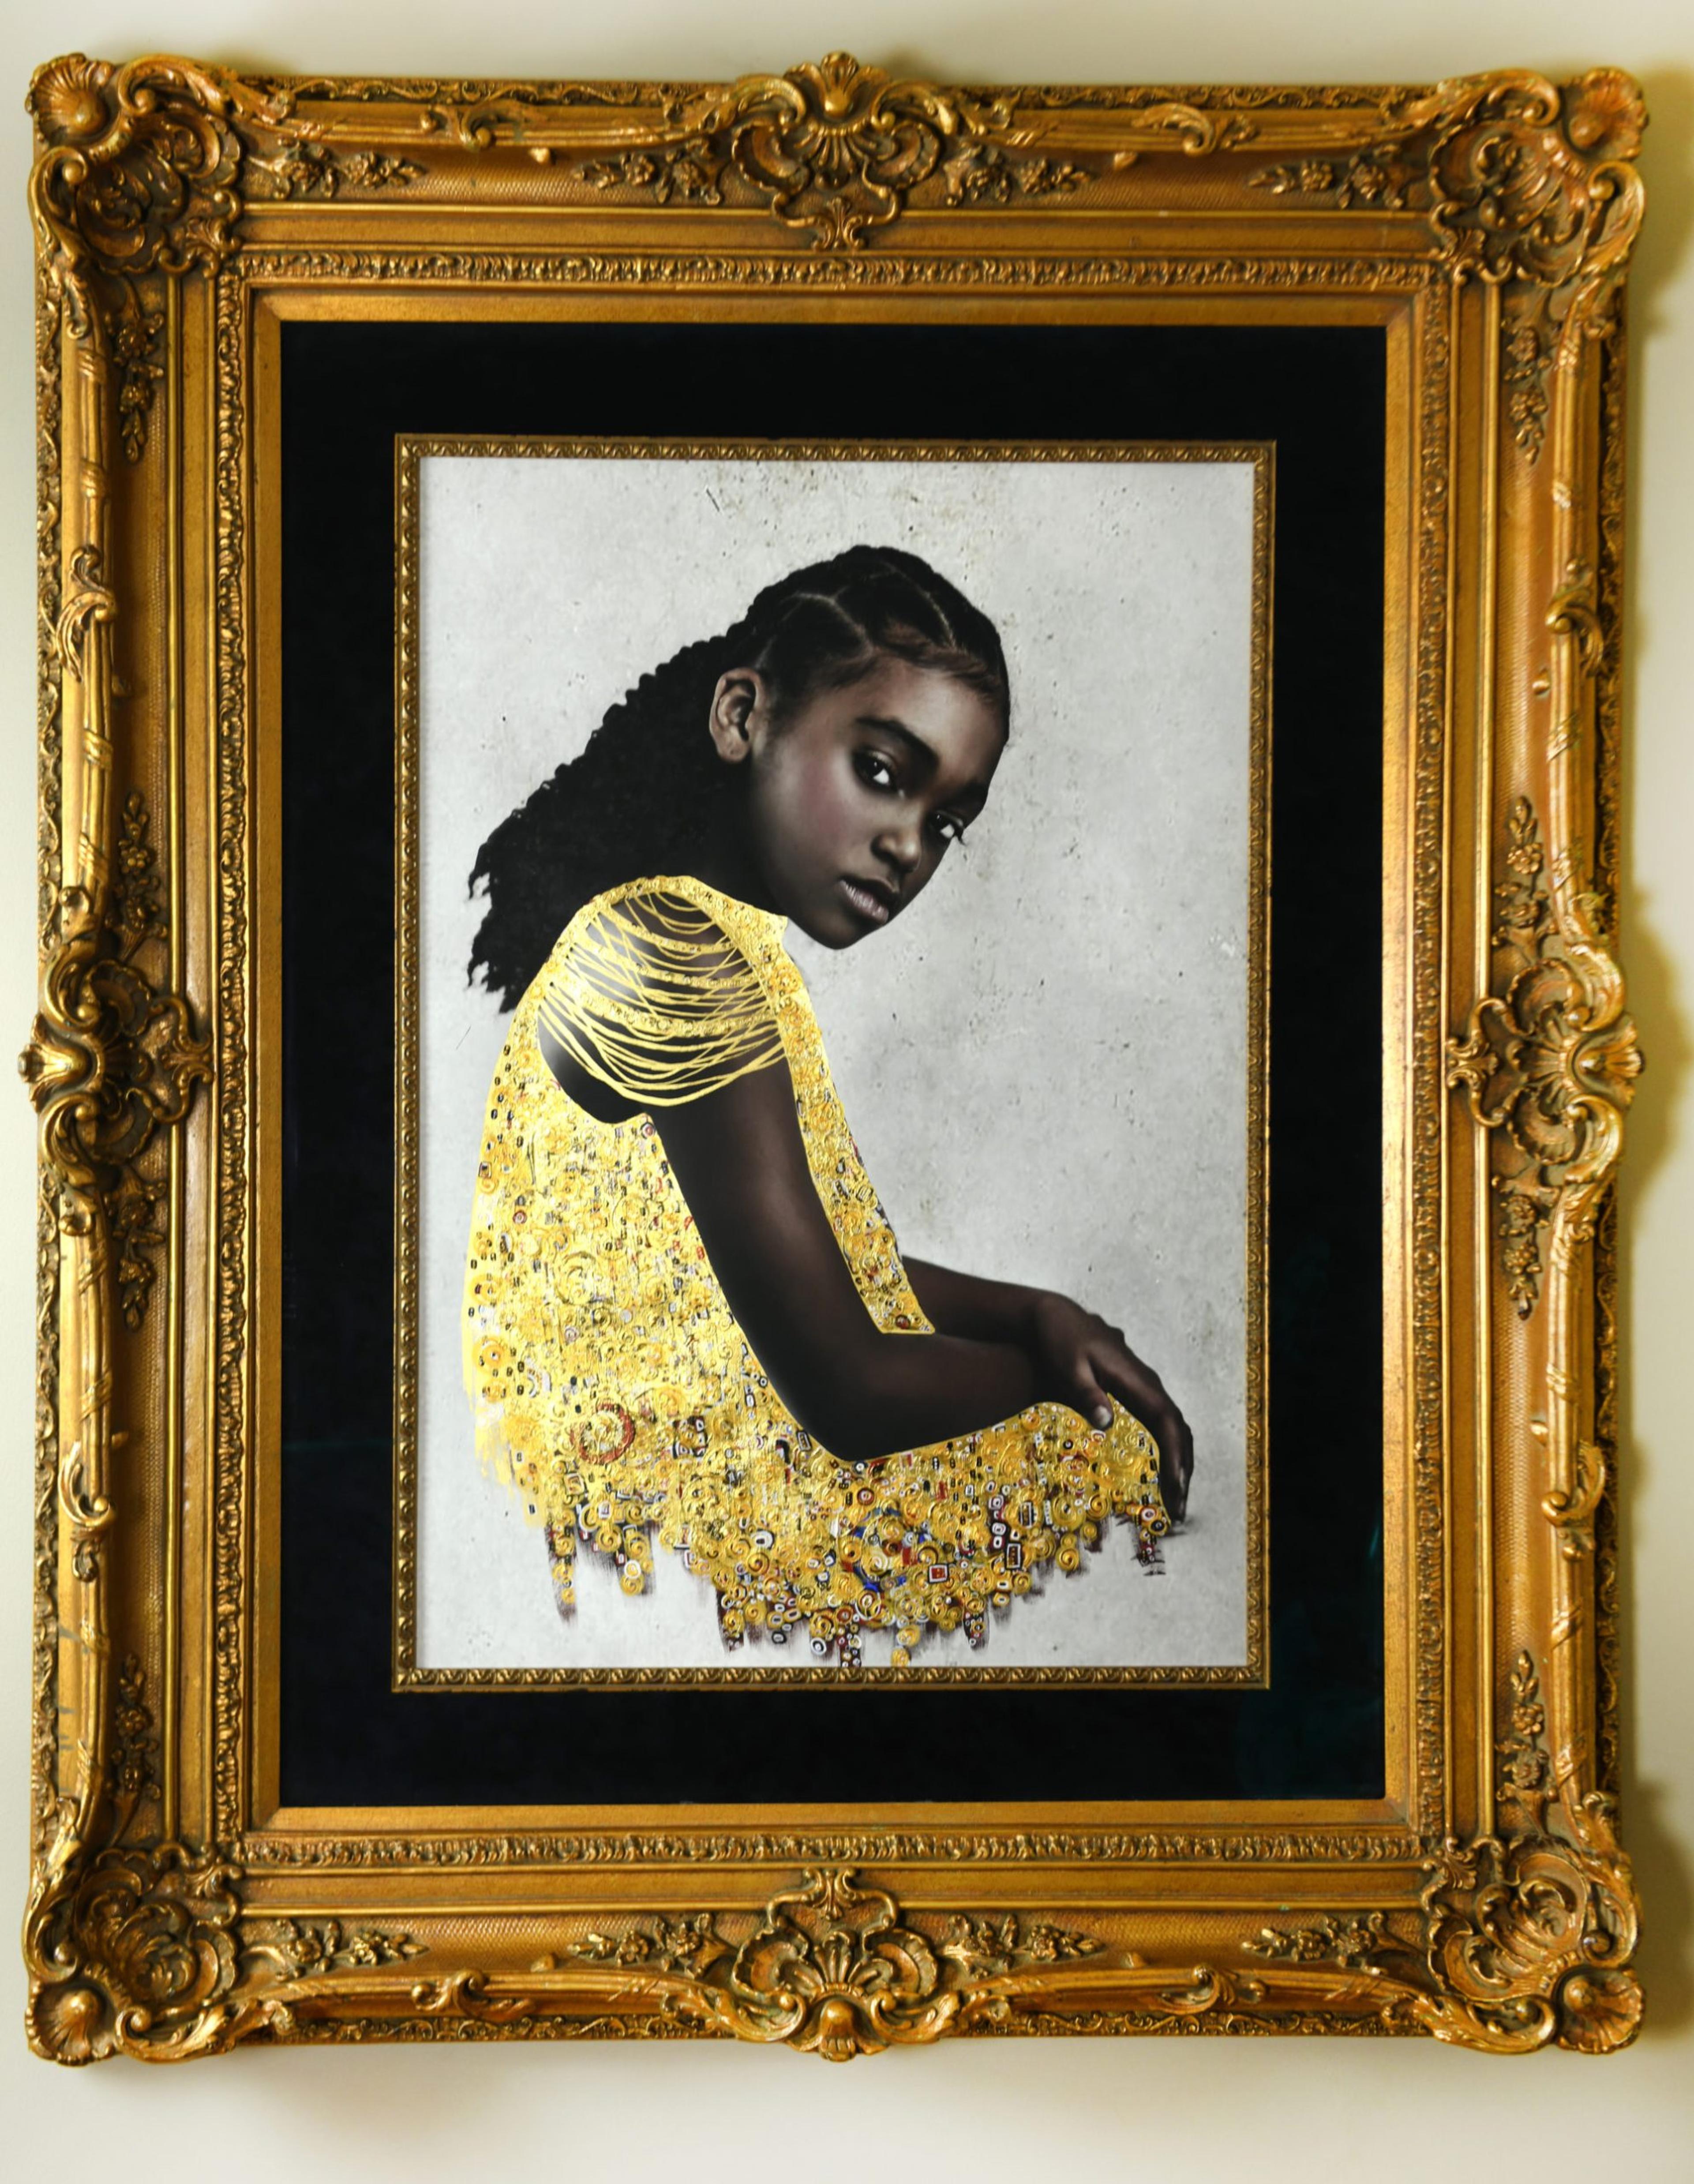 A photograph hanging on a white wall, in a gold ornate frame, of a young girl wearing a yellow dress